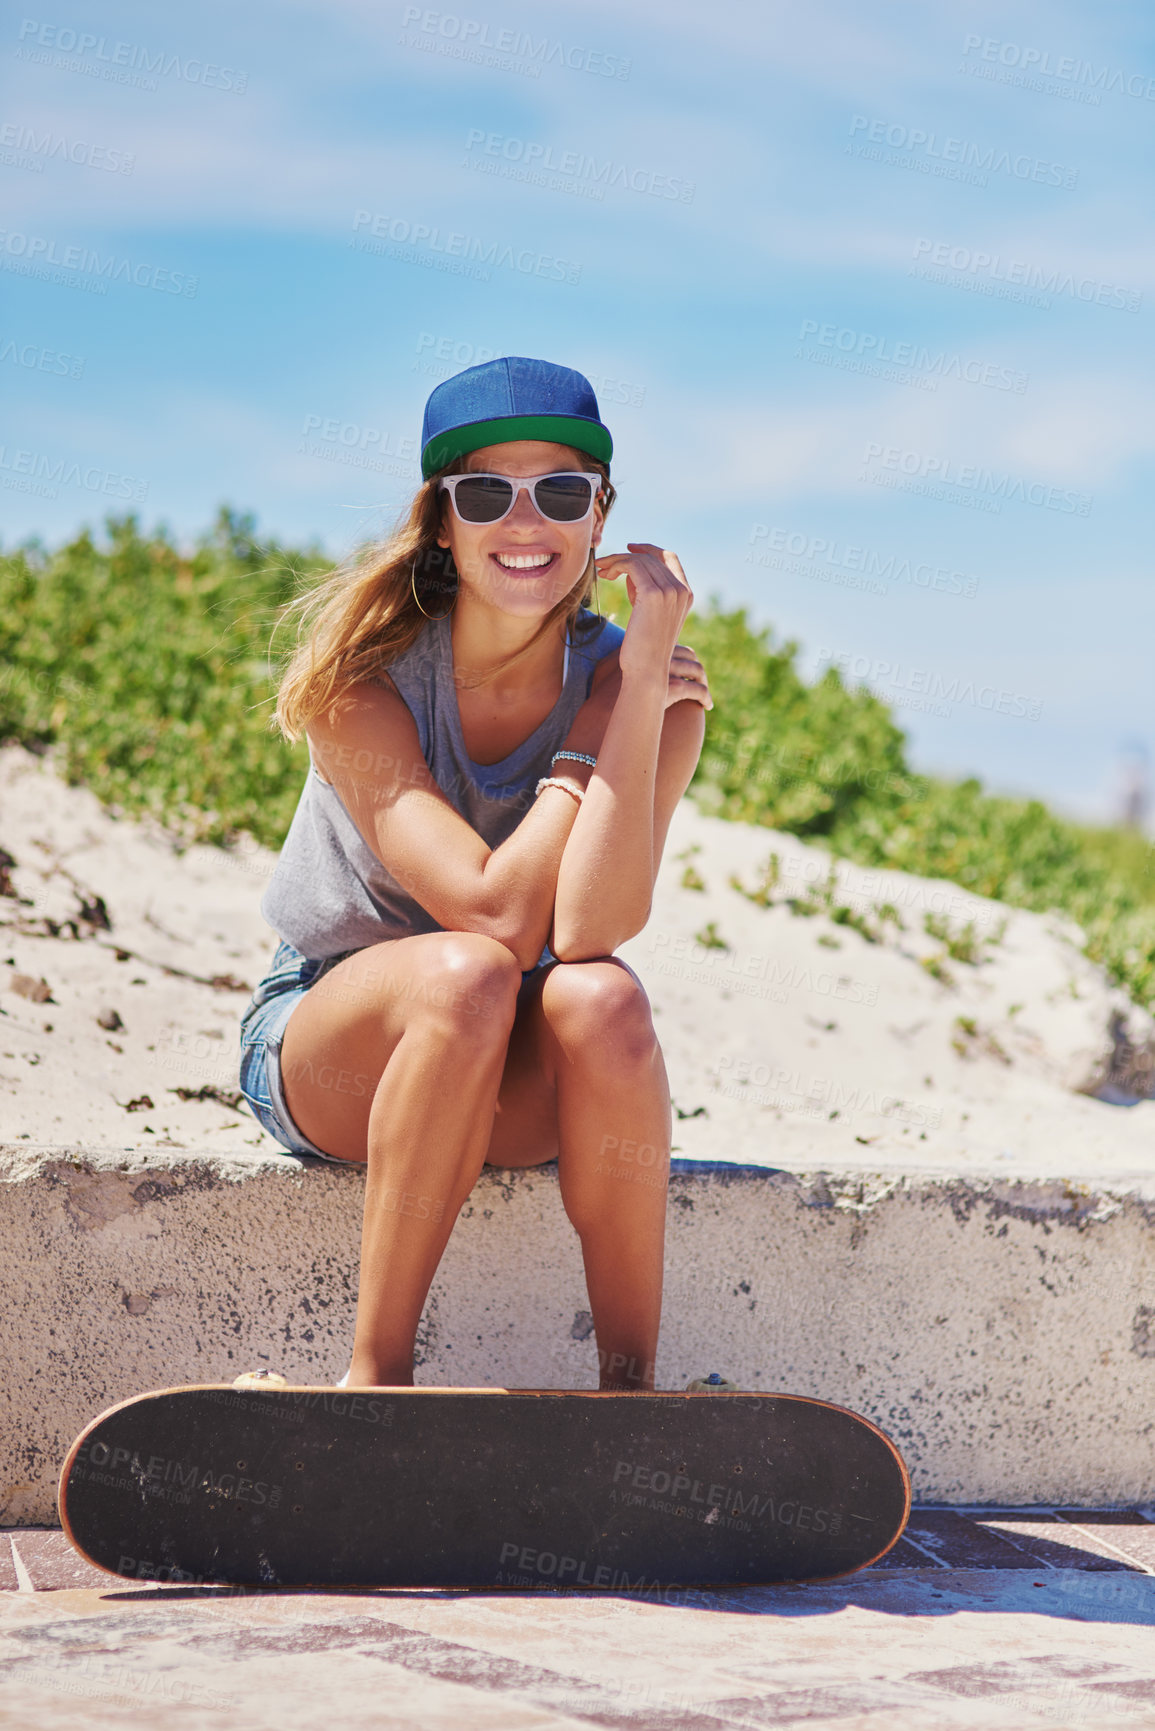 Buy stock photo Shot of a young woman at the beach with her skateboard